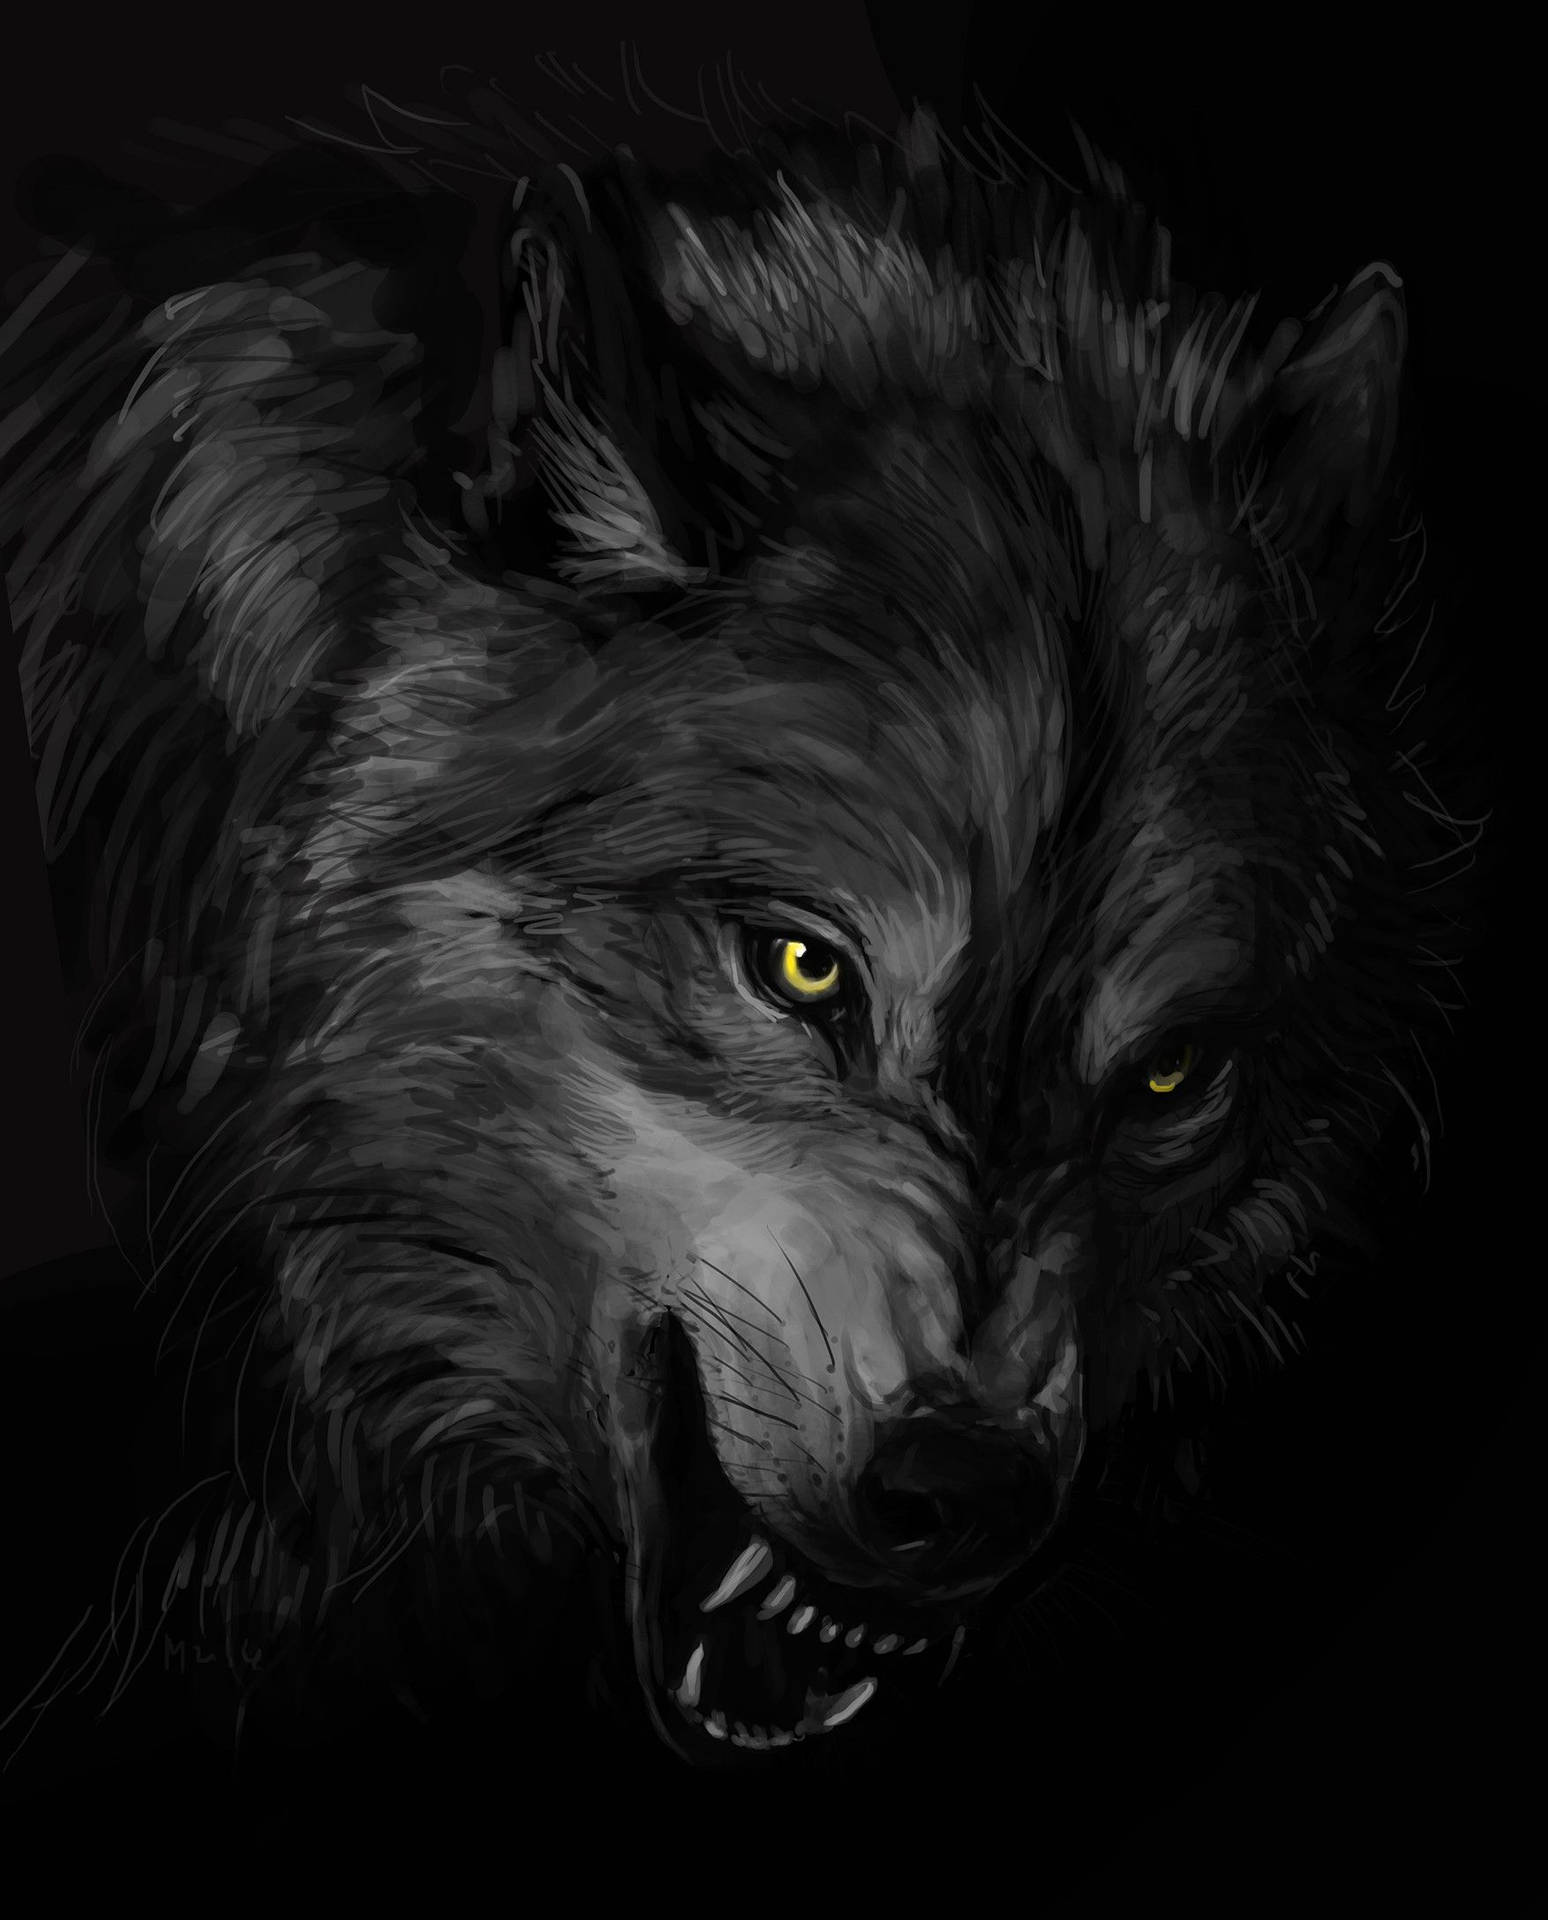 Cool Black Wolf Backgrounds